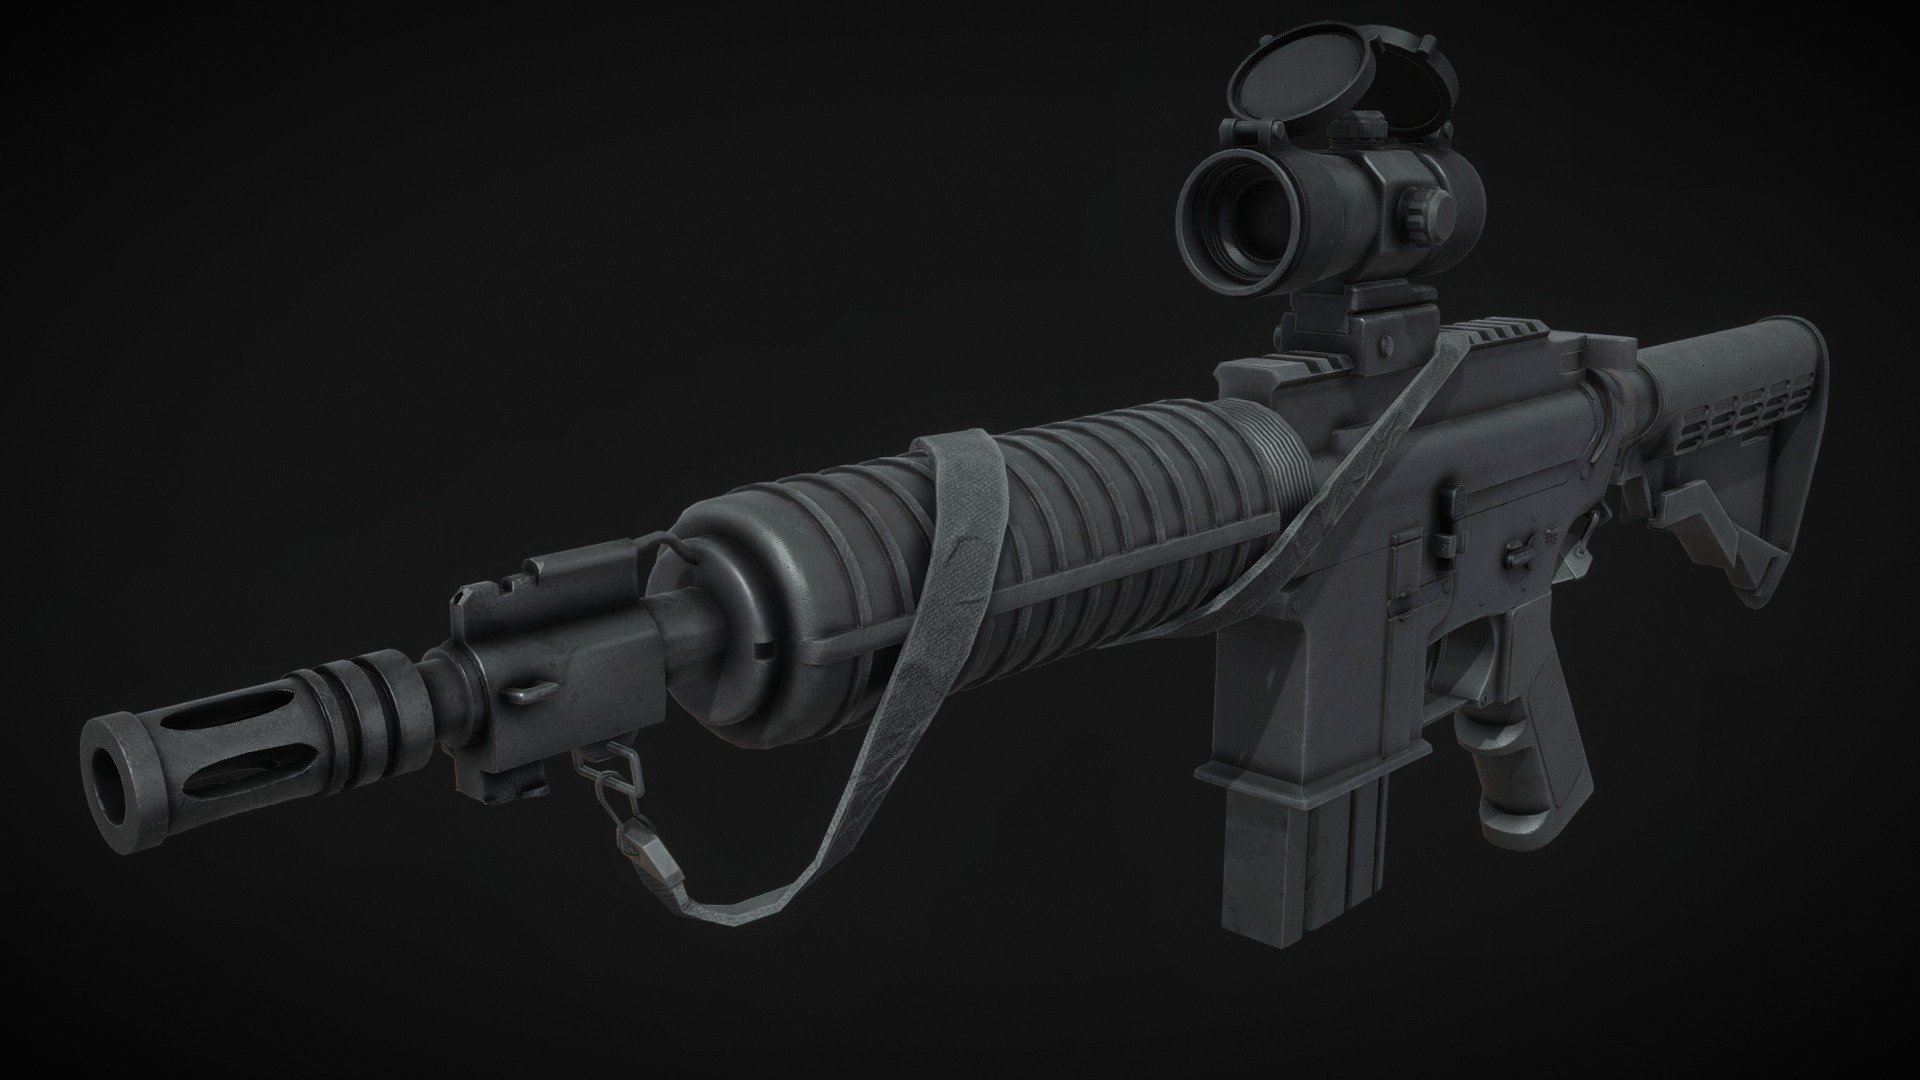 Weapon i made for one of my character models: Modern Soldier

The M4 carbine (officially Carbine, Caliber 5.56 mm, M4) is a 5.56×45mm NATO, gas-operated,[b] magazine-fed carbine developed in the United States during the 1980s. It is a shortened version of the M16A2 assault rifle 3d model